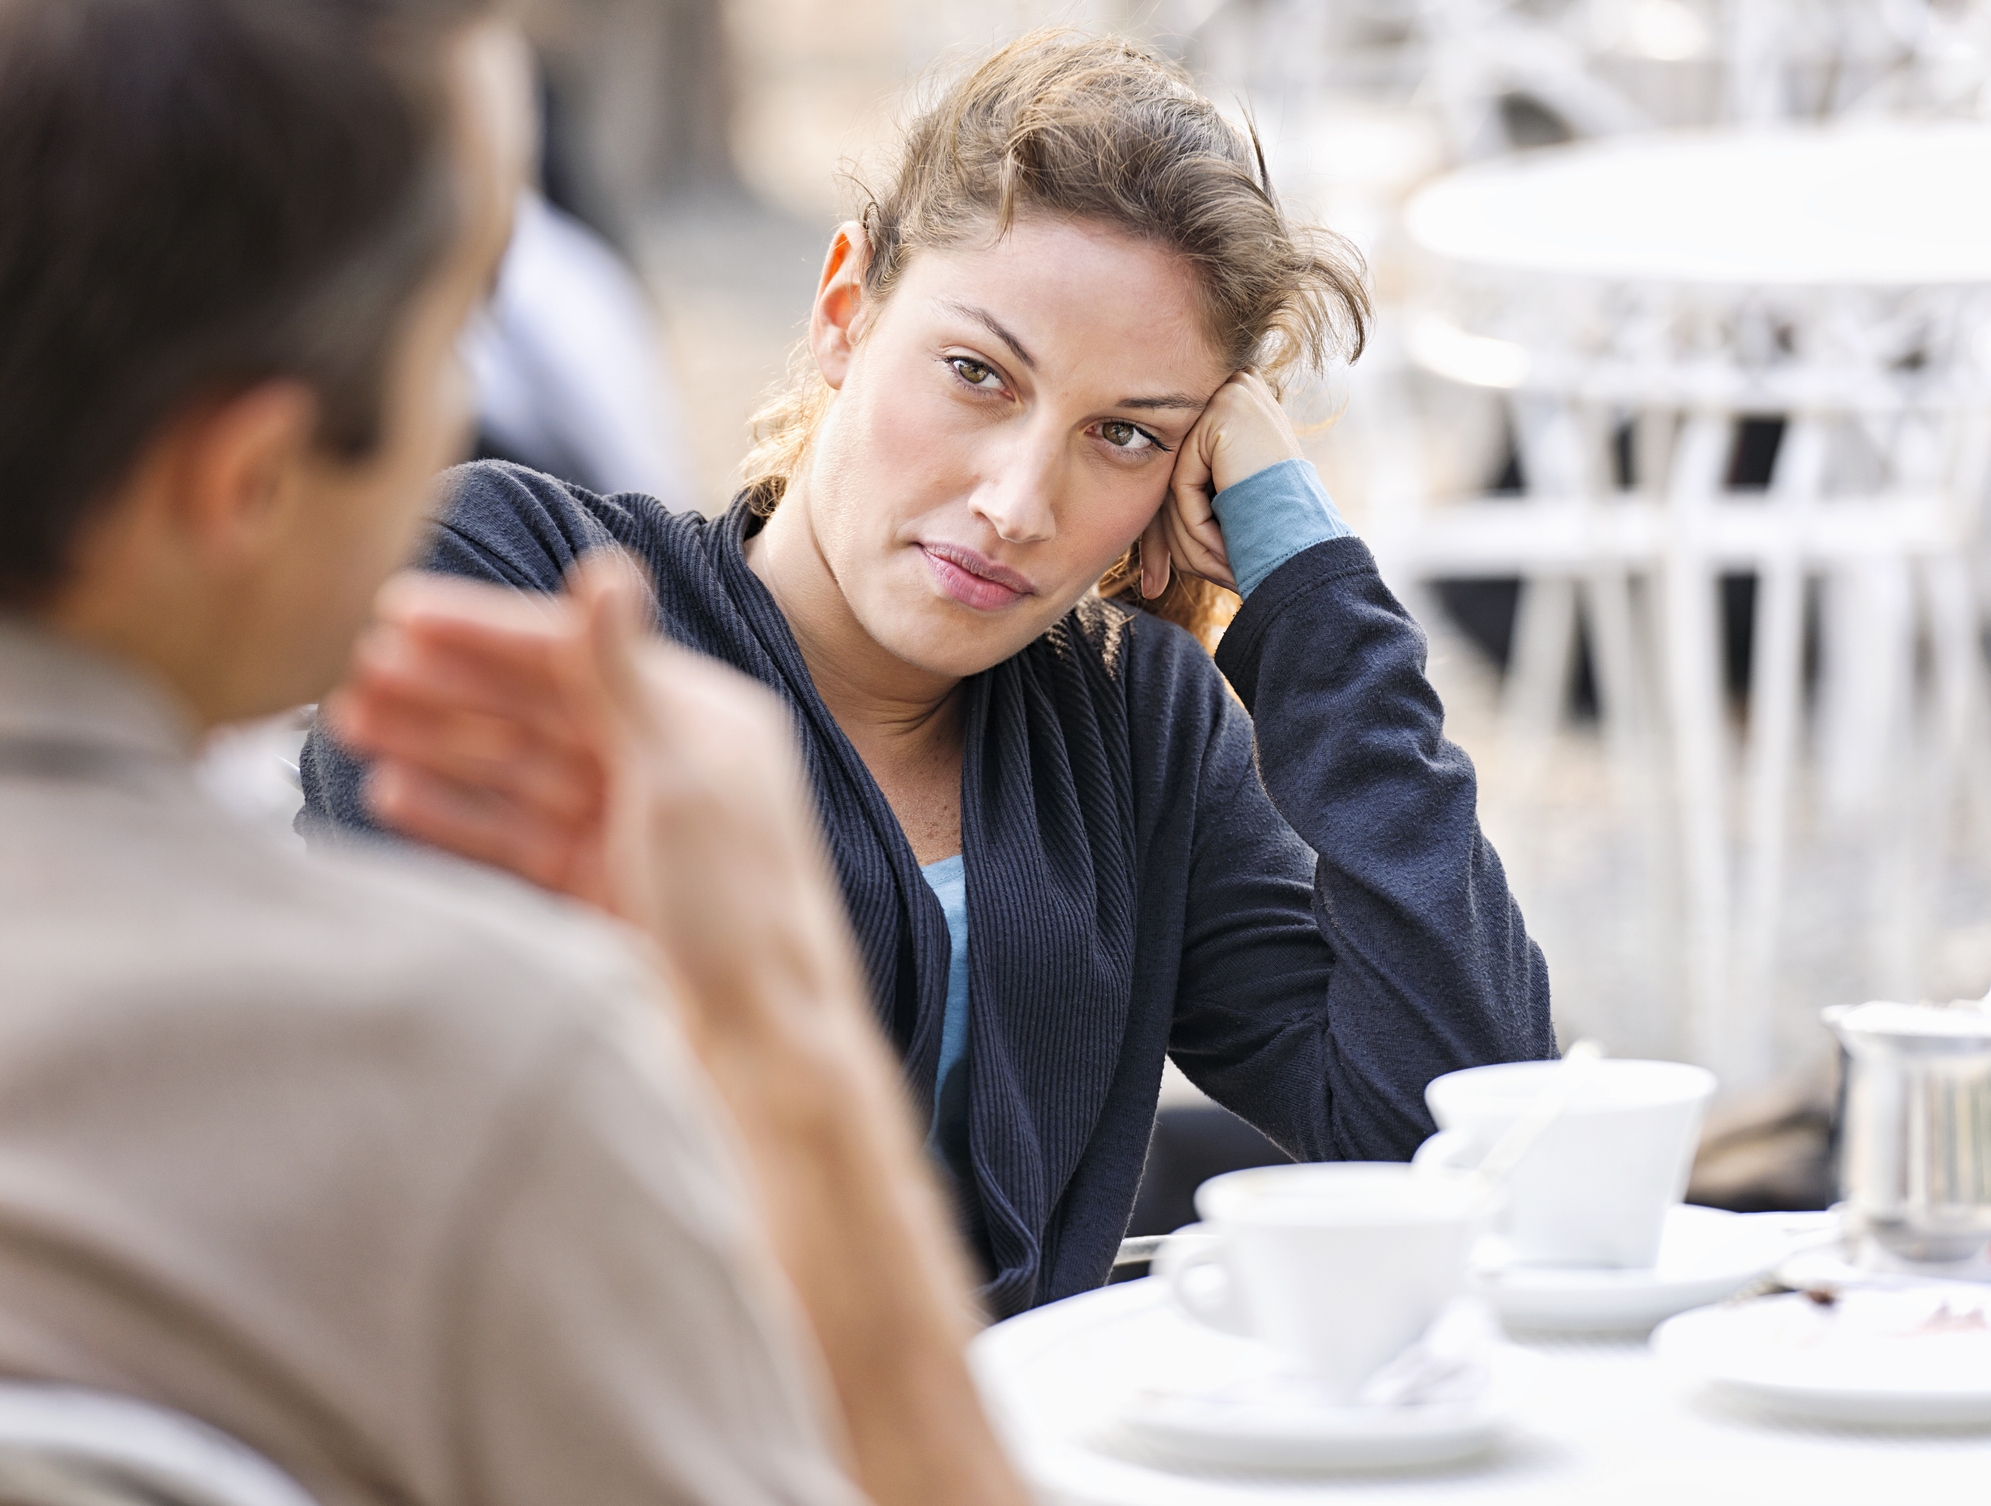 Two people sit at a table with coffee, one appears disinterested or bored in conversation